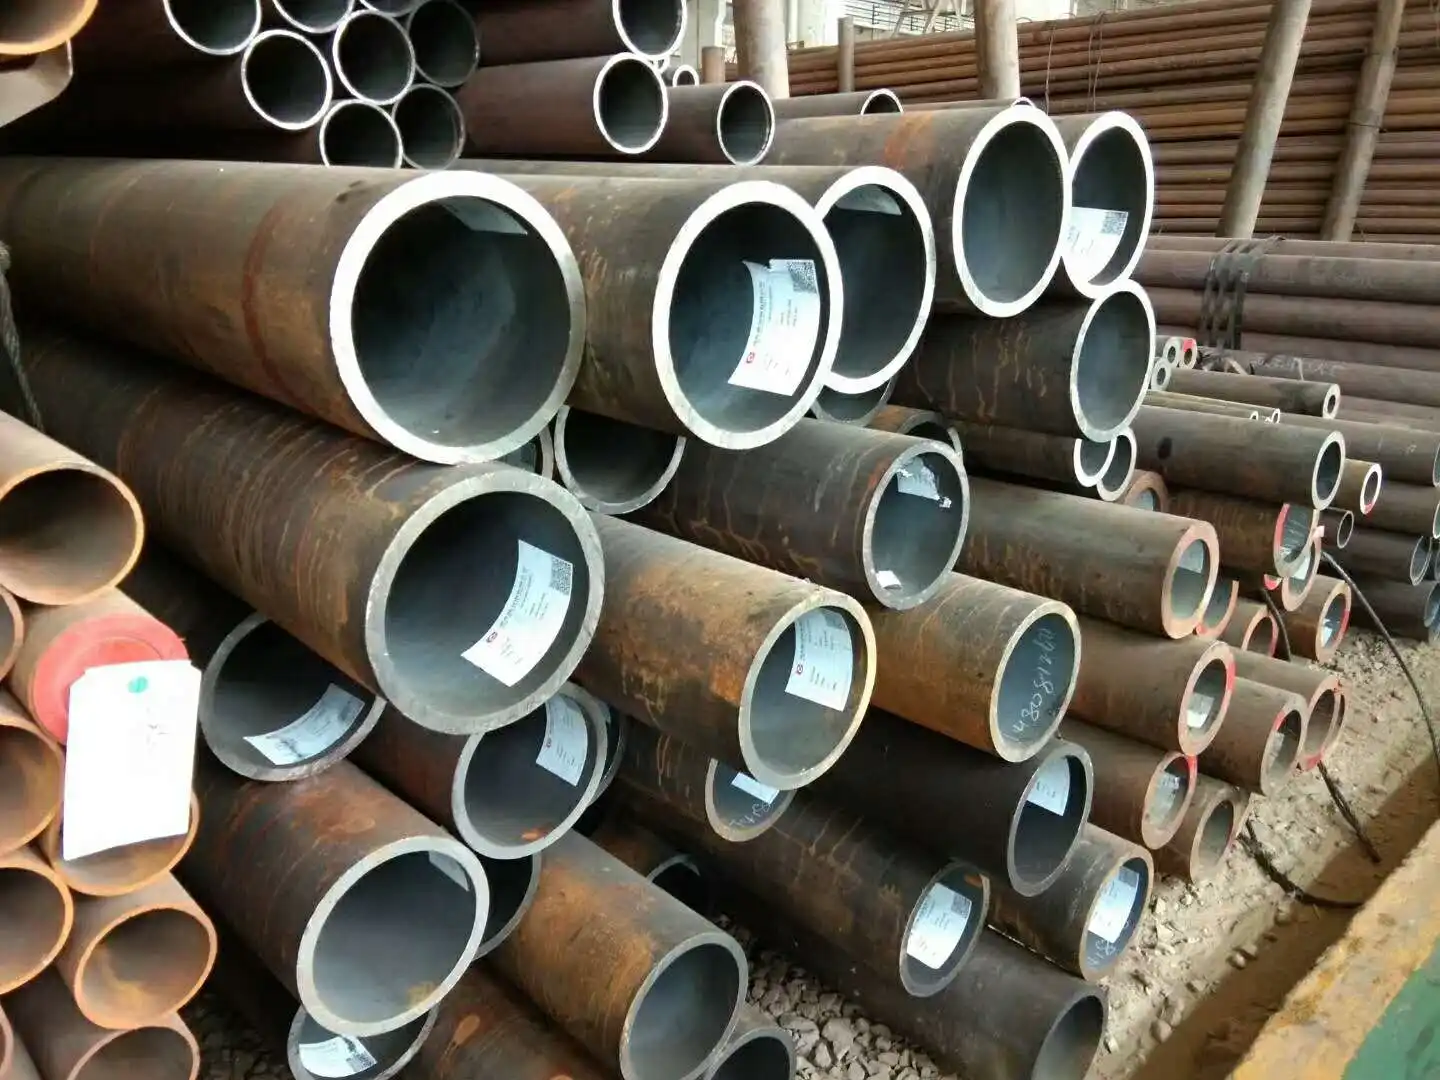 Steel mills cut prices to ship, steel prices weakened and adjusted